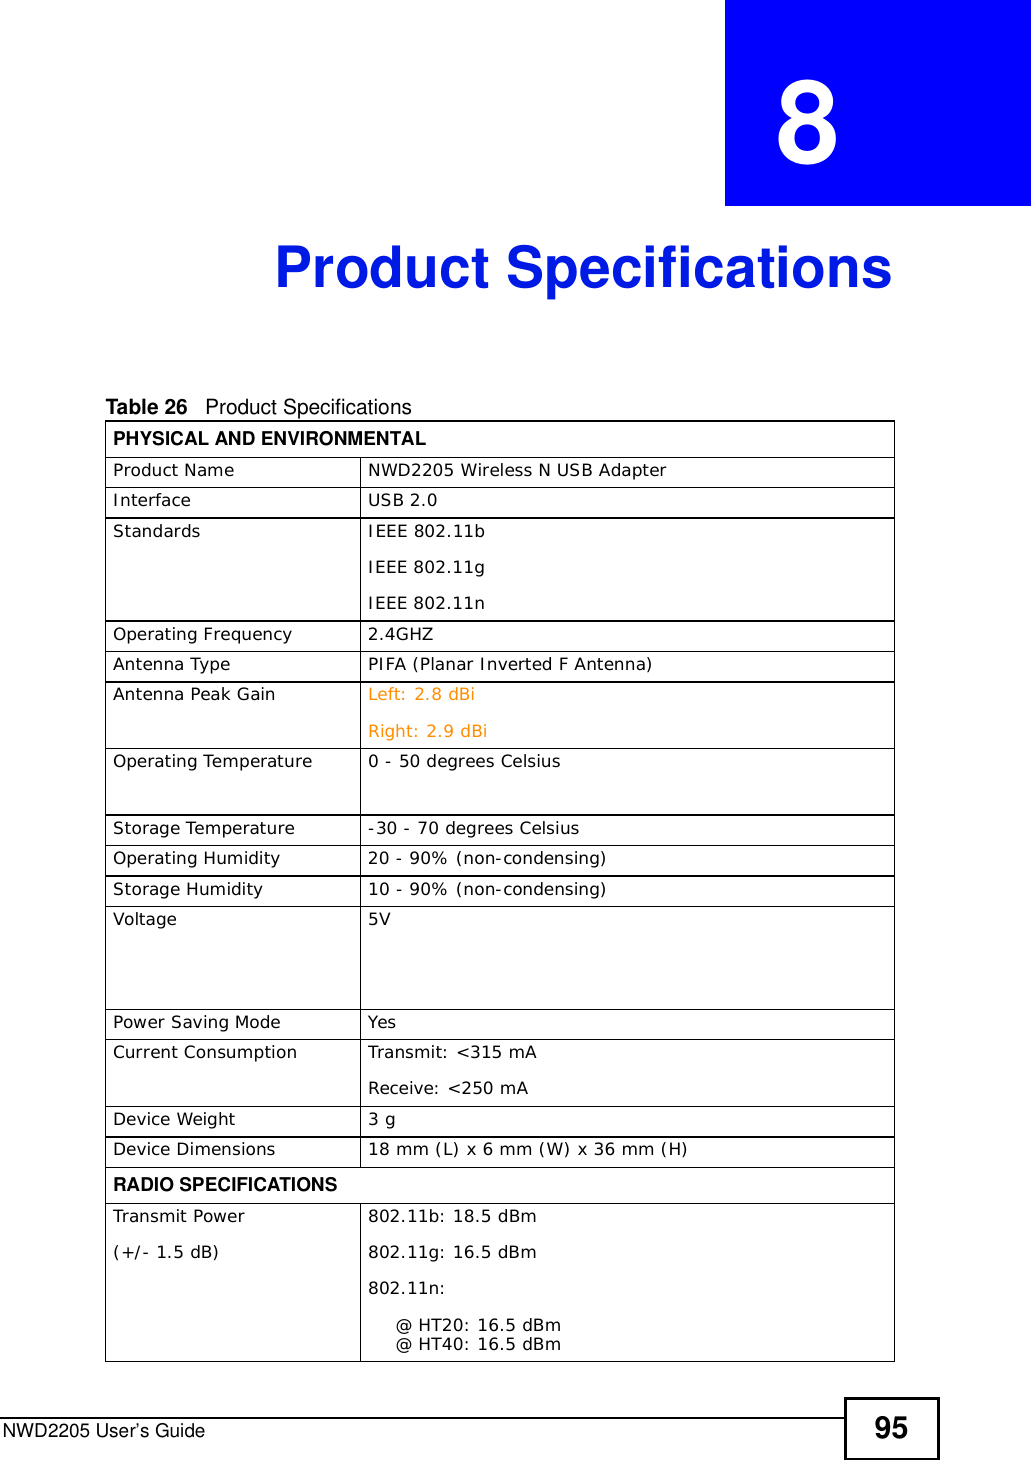 NWD2205 User’s Guide 95CHAPTER  8 Product SpecificationsTable 26   Product Specifications PHYSICAL AND ENVIRONMENTALProduct Name NWD2205 Wireless N USB AdapterInterfaceUSB 2.0StandardsIEEE 802.11bIEEE 802.11gIEEE 802.11n Operating Frequency2.4GHZAntenna TypePIFA (Planar Inverted F Antenna)Antenna Peak Gain Left: 2.8 dBi Right: 2.9 dBiOperating Temperature0 - 50 degrees CelsiusStorage Temperature-30 - 70 degrees CelsiusOperating Humidity20 - 90% (non-condensing)Storage Humidity 10 - 90% (non-condensing)Voltage5VPower Saving ModeYesCurrent ConsumptionTransmit: &lt;315 mAReceive: &lt;250 mADevice Weight3 g Device Dimensions18 mm (L) x 6 mm (W) x 36 mm (H)RADIO SPECIFICATIONSTransmit Power(+/- 1.5 dB)802.11b: 18.5 dBm 802.11g: 16.5 dBm802.11n: @ HT20: 16.5 dBm@ HT40: 16.5 dBm